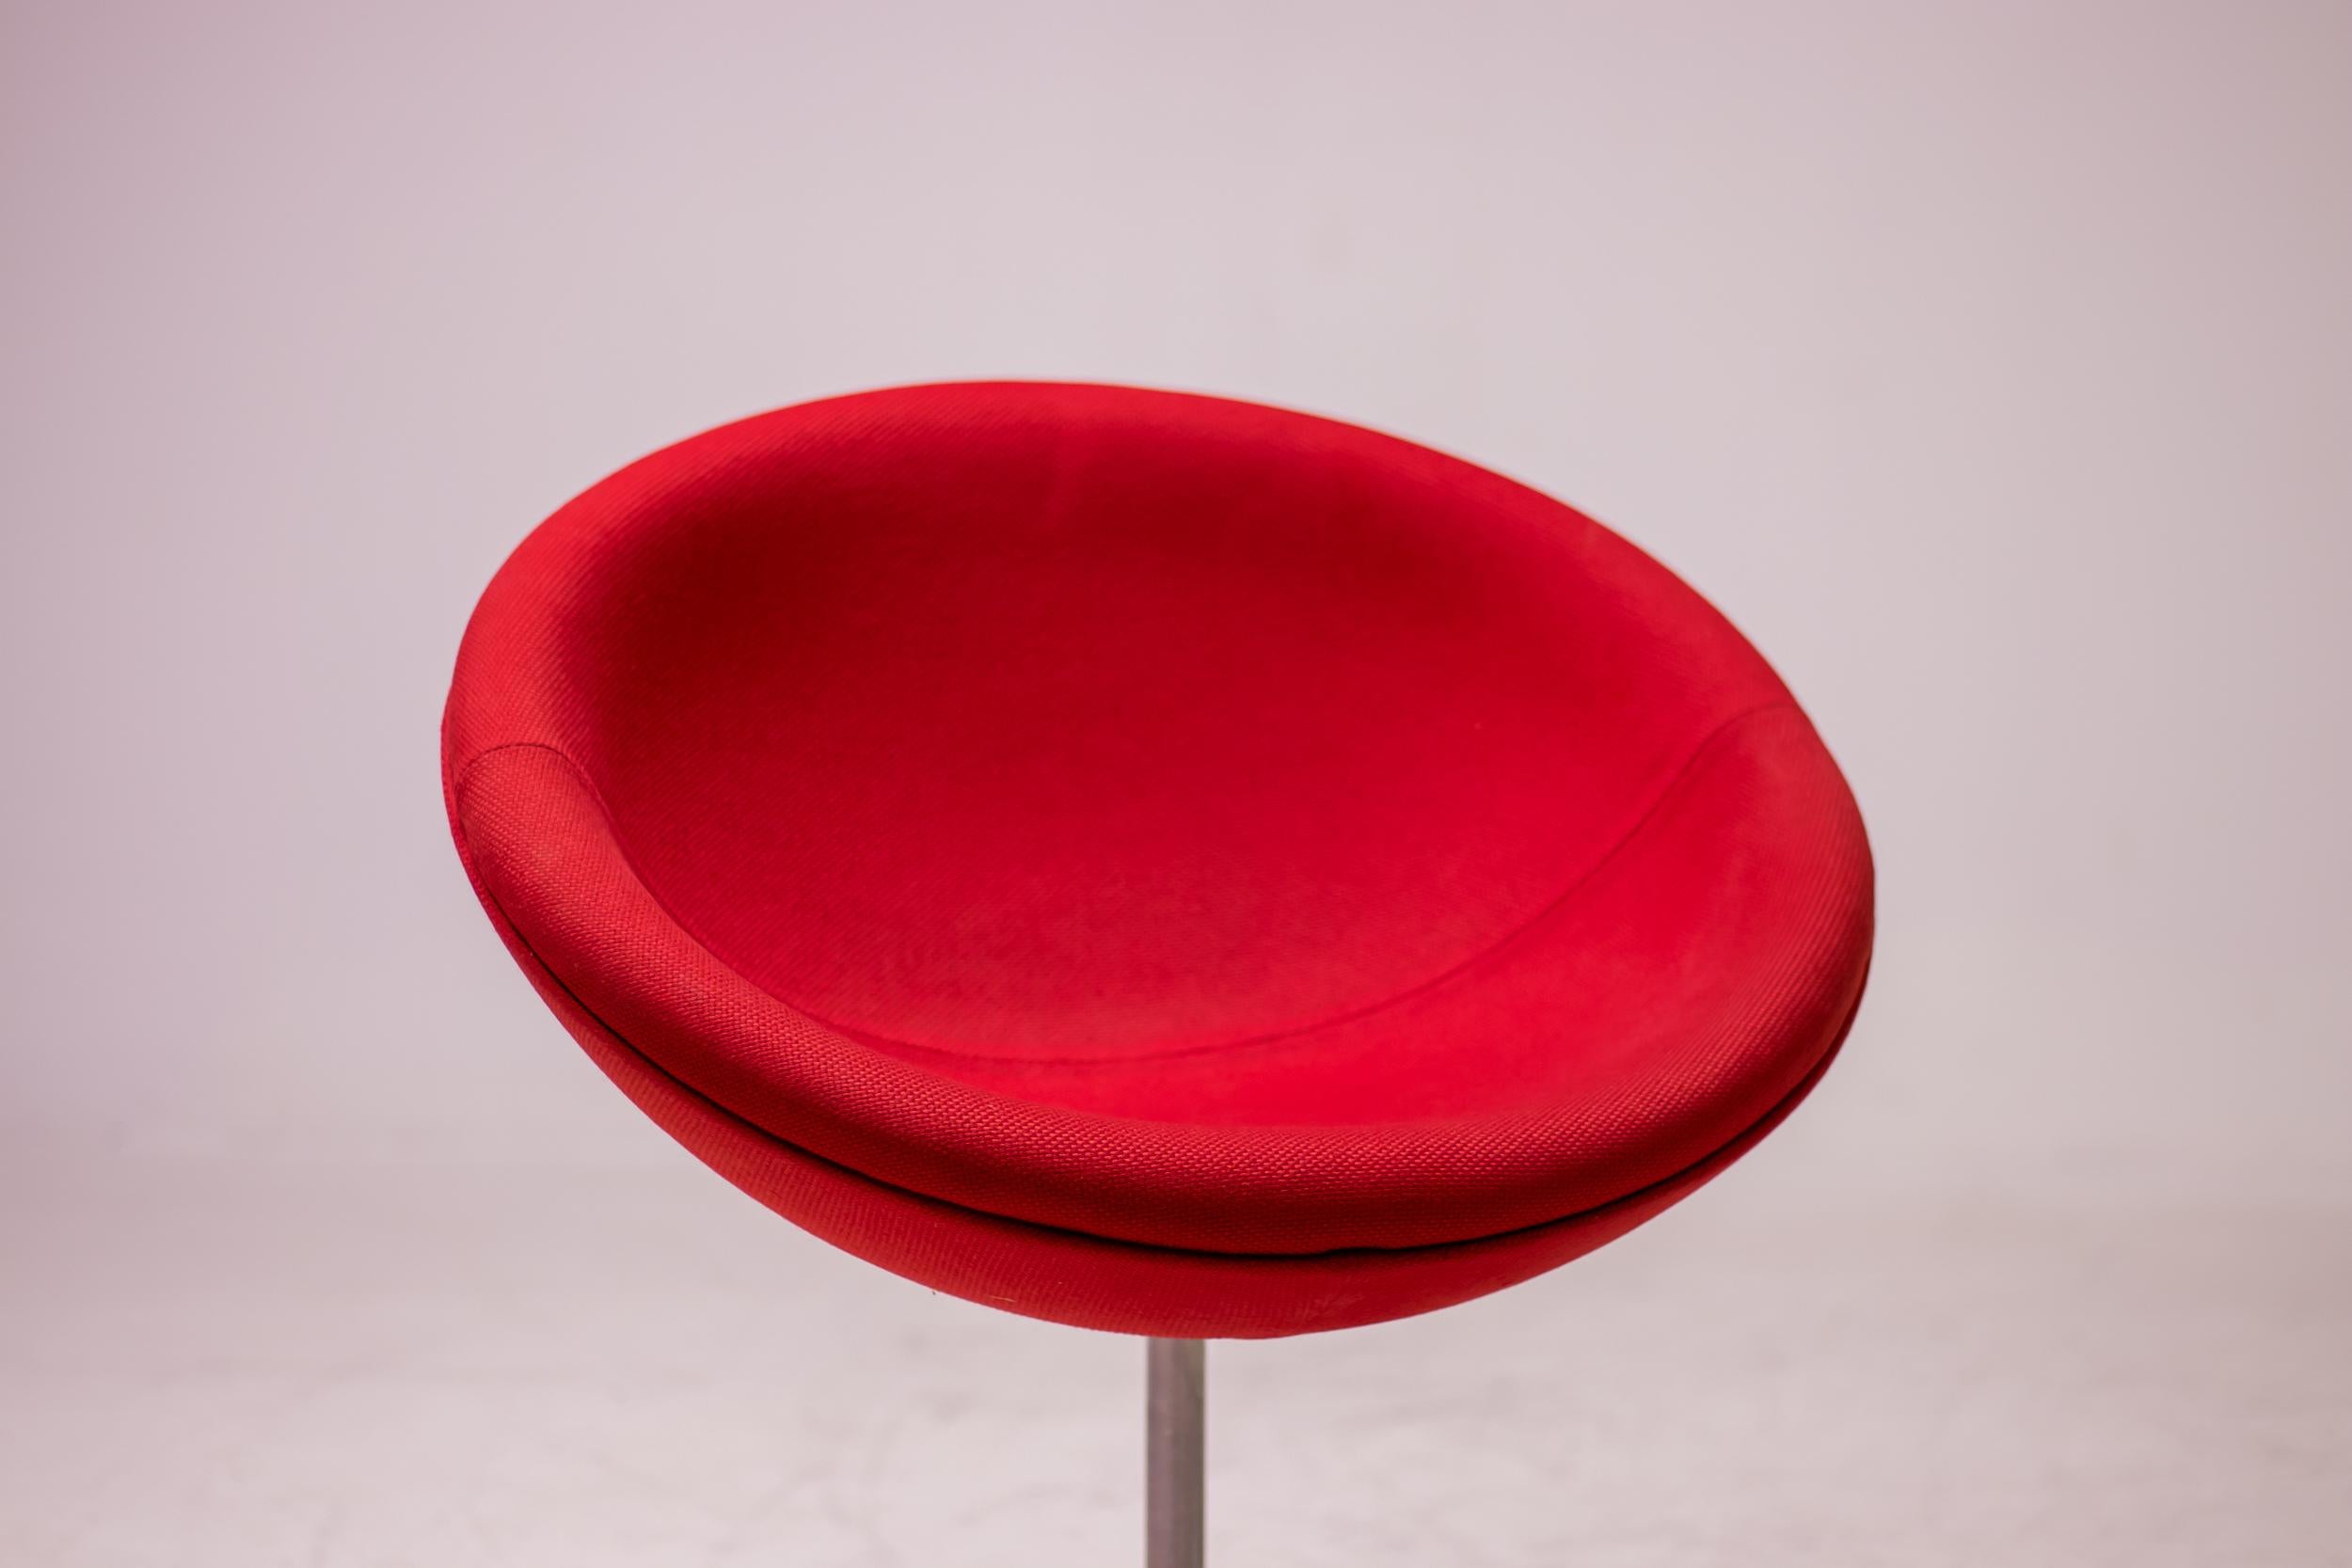 Iconic red C1 armchair designed by Verner Panton and manufactured by Vitra. On swivel bearings and slightly tilted, the upholstered seat shell is comfortable - both for relaxed sitting leaning back and for upright sitting. The C1 can be integrated